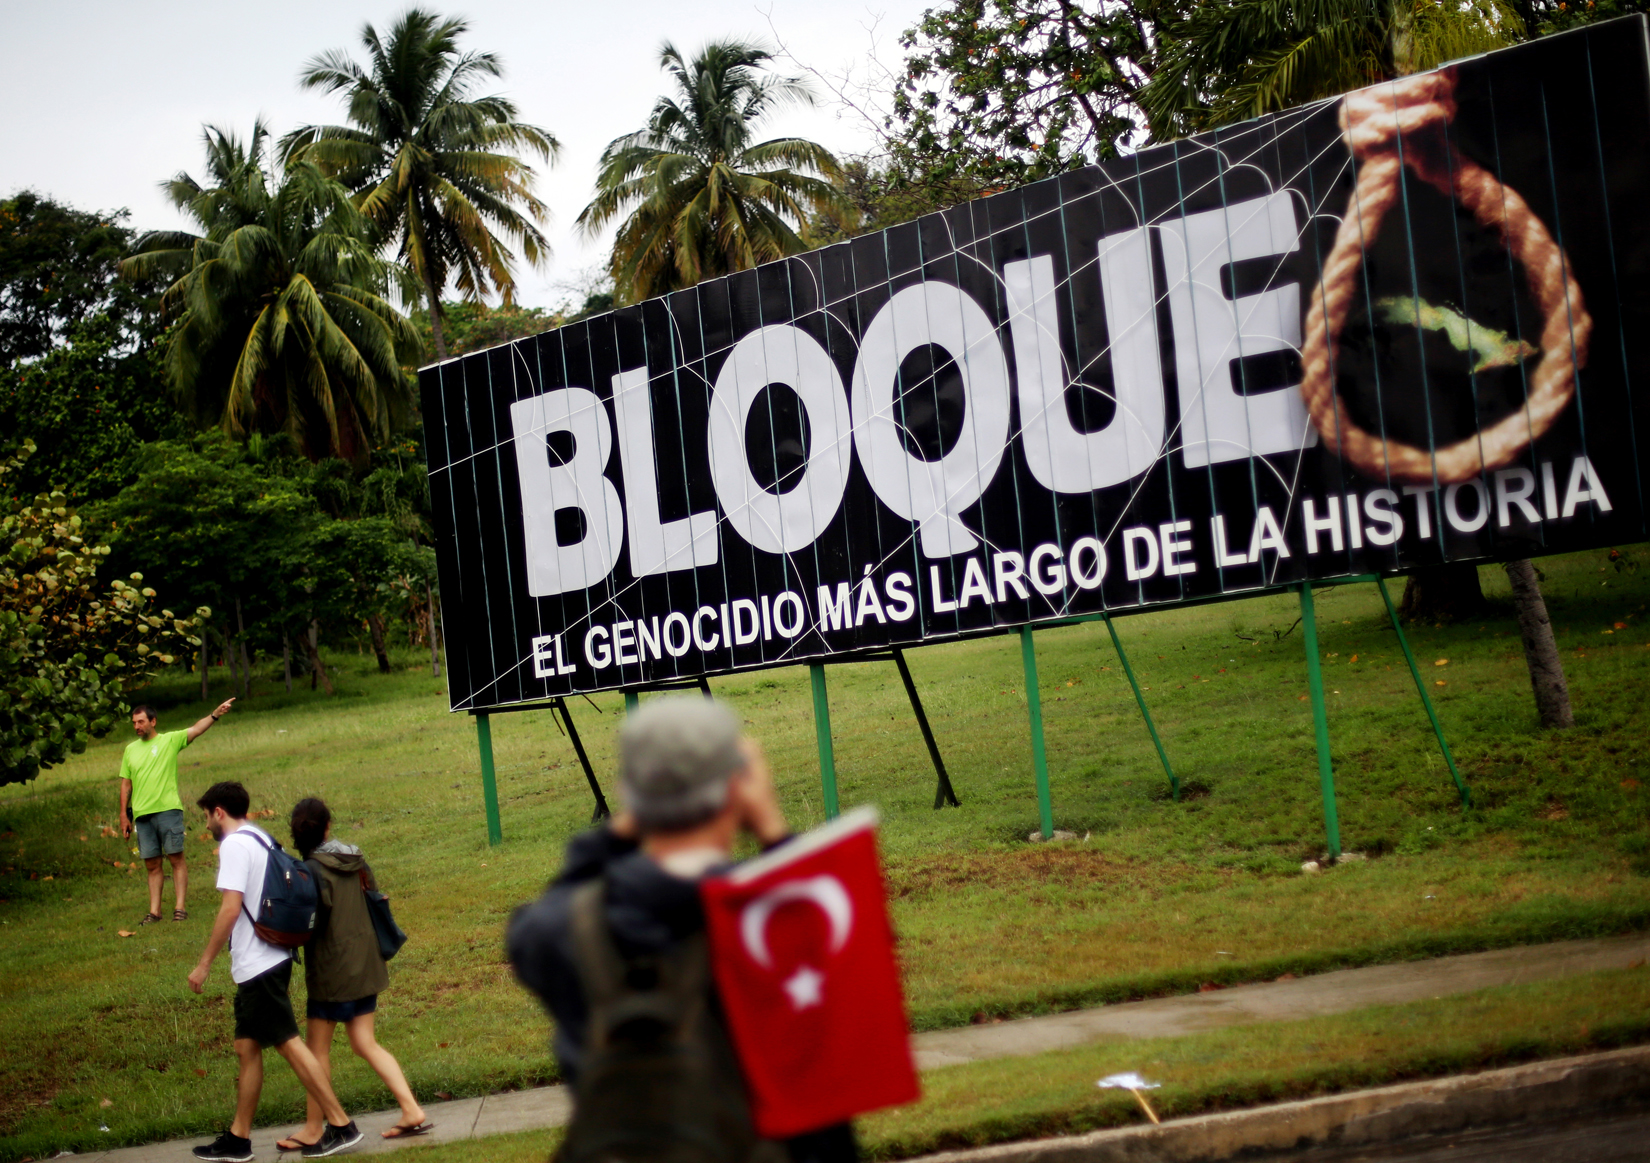 People march by a sign saying, {quote}The embargo: the longest genocide in history,{quote} during the 1st of May Labor Day March - a call for people to march in support of their local socialist government and the Cuban Revolution - in Havana, Cuba, on May 01, 2015. The commercial, financial and economic embargo enforced by the United States against Cuba went into effect in 1960, nearly two years after the deposition of the Fulgencio Batista dictatorship by the Cuban Revolution, and just after Cuba nationalized American-owned Cuban properties without remuneration to the States. The embargo at first did not apply to food and medicine, but was quickly broadened to nearly all U.S. exports. Proponents of the embargo cite repeated human rights violations in the country and the appropriated property as reasons to uphold it. Critics define the embargo as too harsh; the UN General Assembly has passed a resolution each year since 1992 criticizing its ongoing impact, citing it to be in violation of the Charter of the UN and international law. In December of 2014, U.S. President Barack Obama signaled an openness in thawing of U.S.-Cuban relations, which started with diplomatic talks and transitioned to the removal of Cuba from the U.S. list of state sponsors of terrorism in May of this year. 